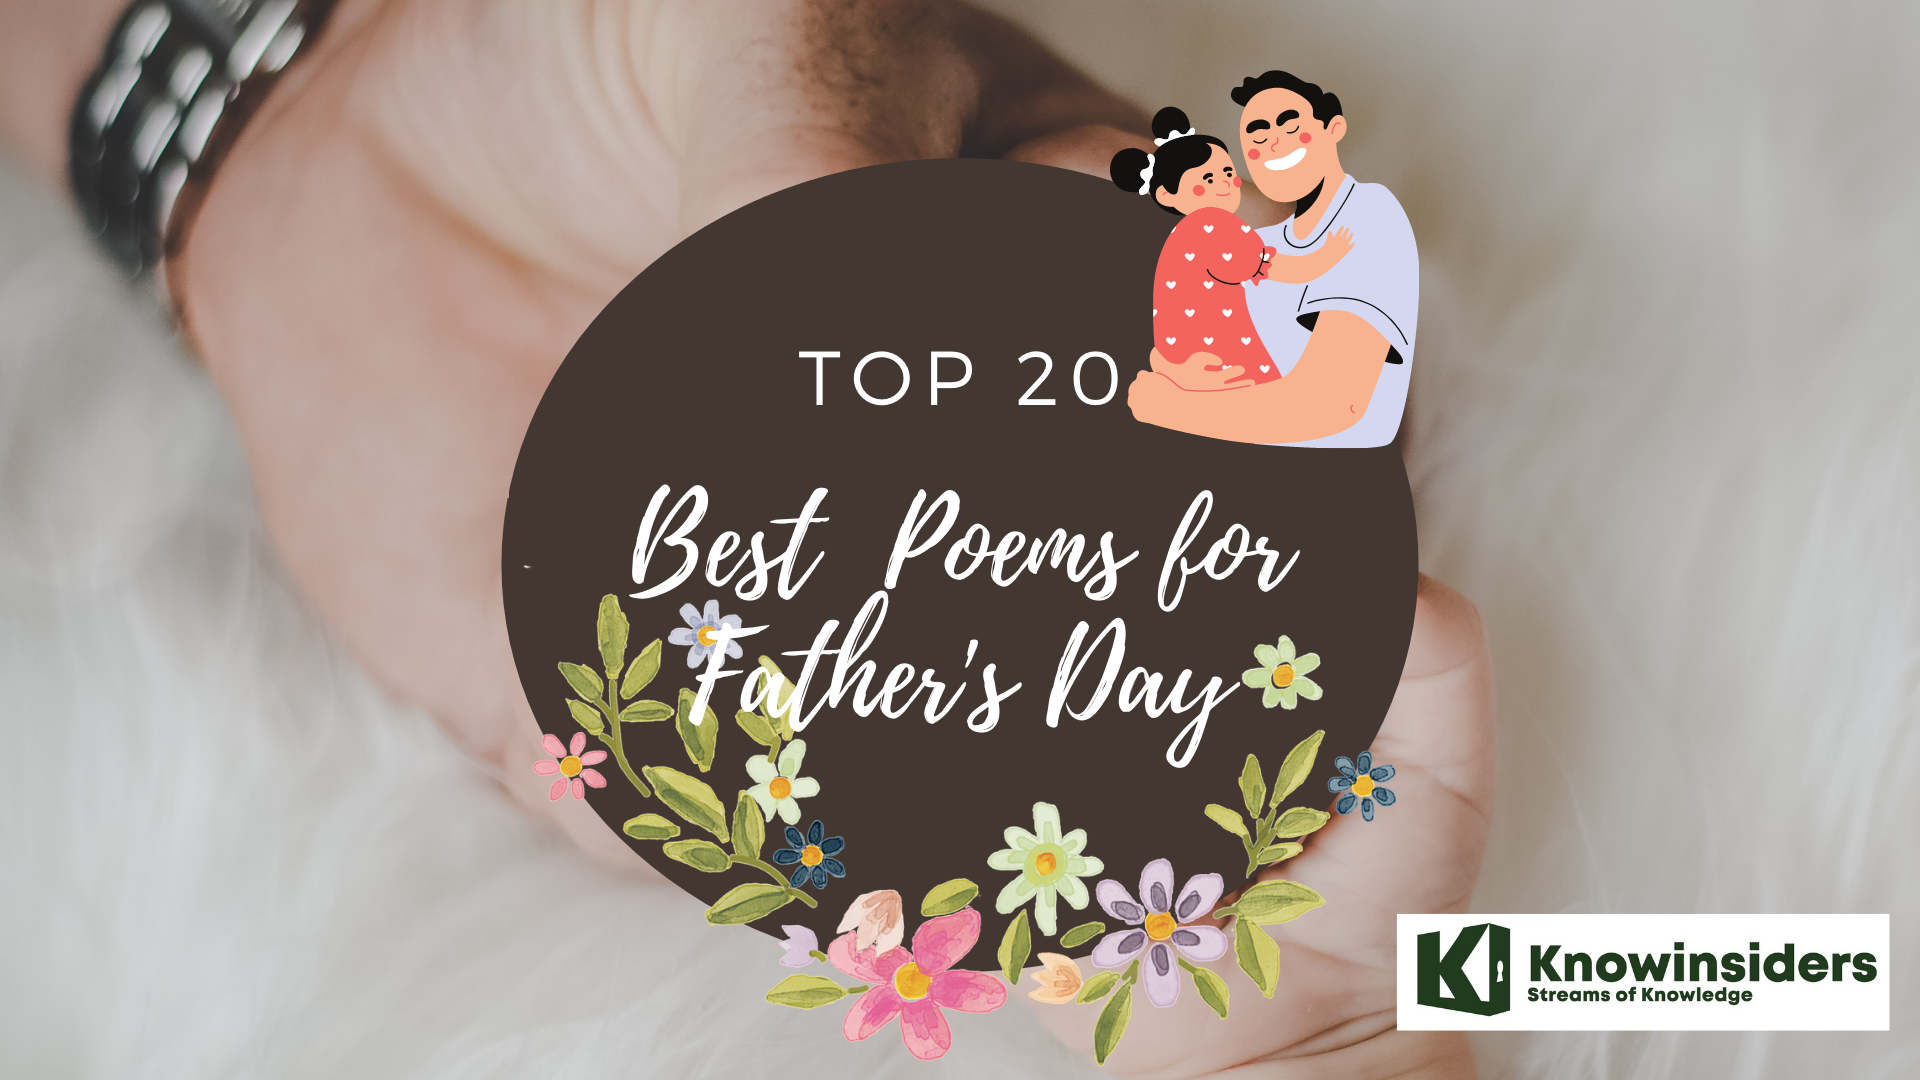 Top 20 Best Poems For Father's Day